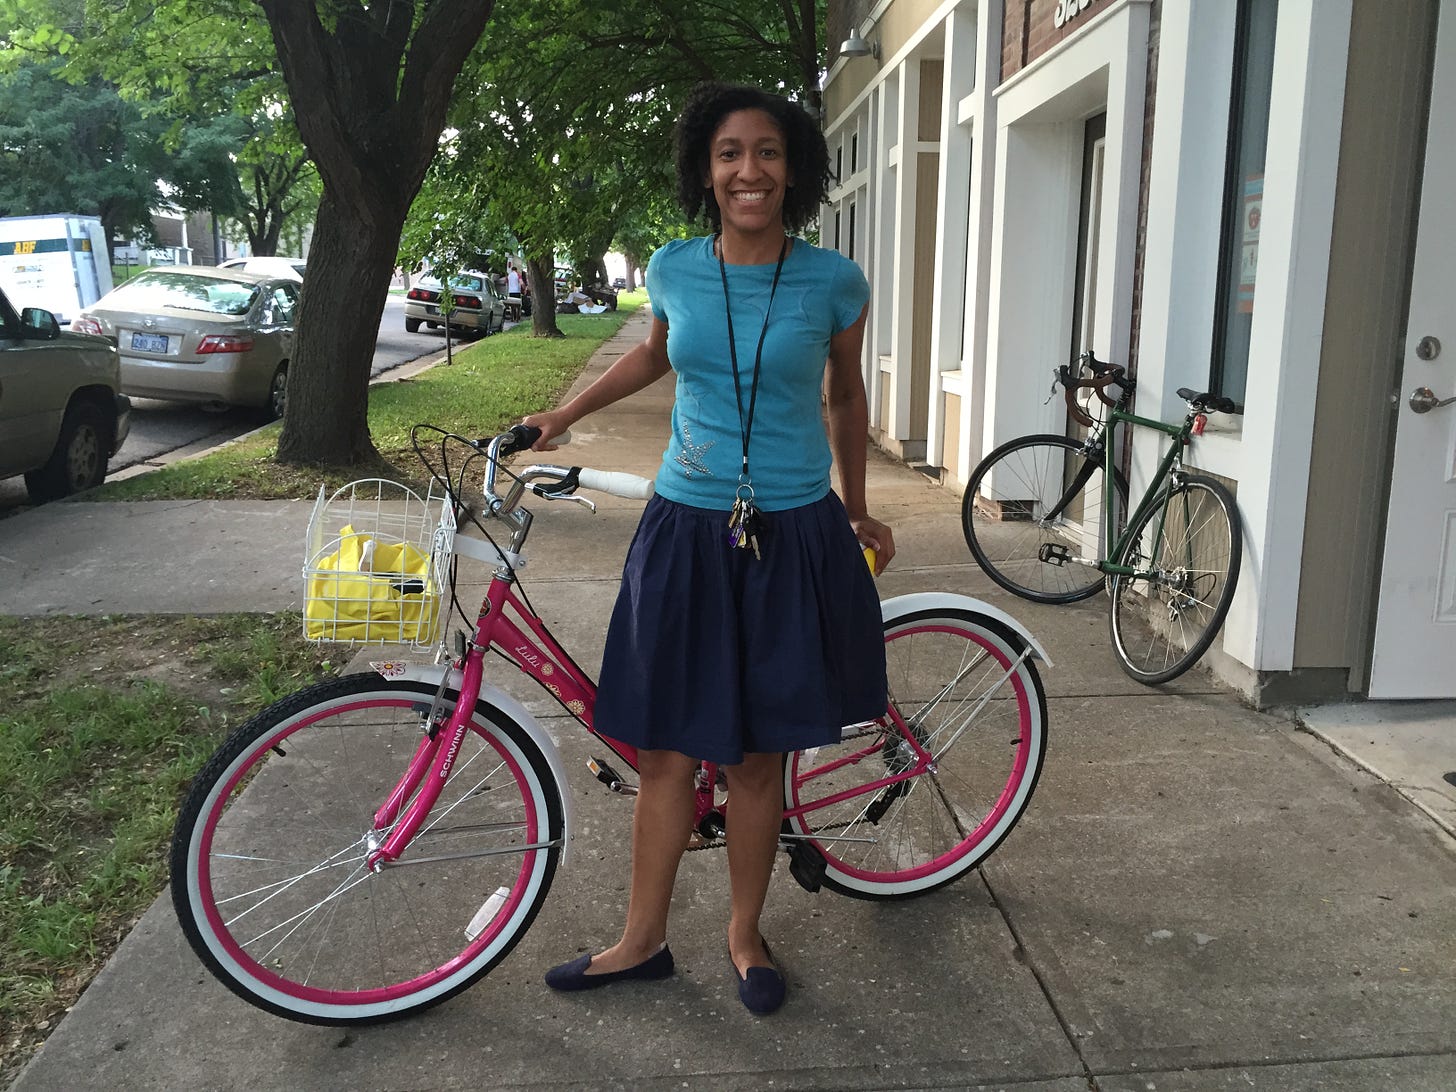 Kristen, in a blue outfit, stands in front of her pink bike on the sidewalk